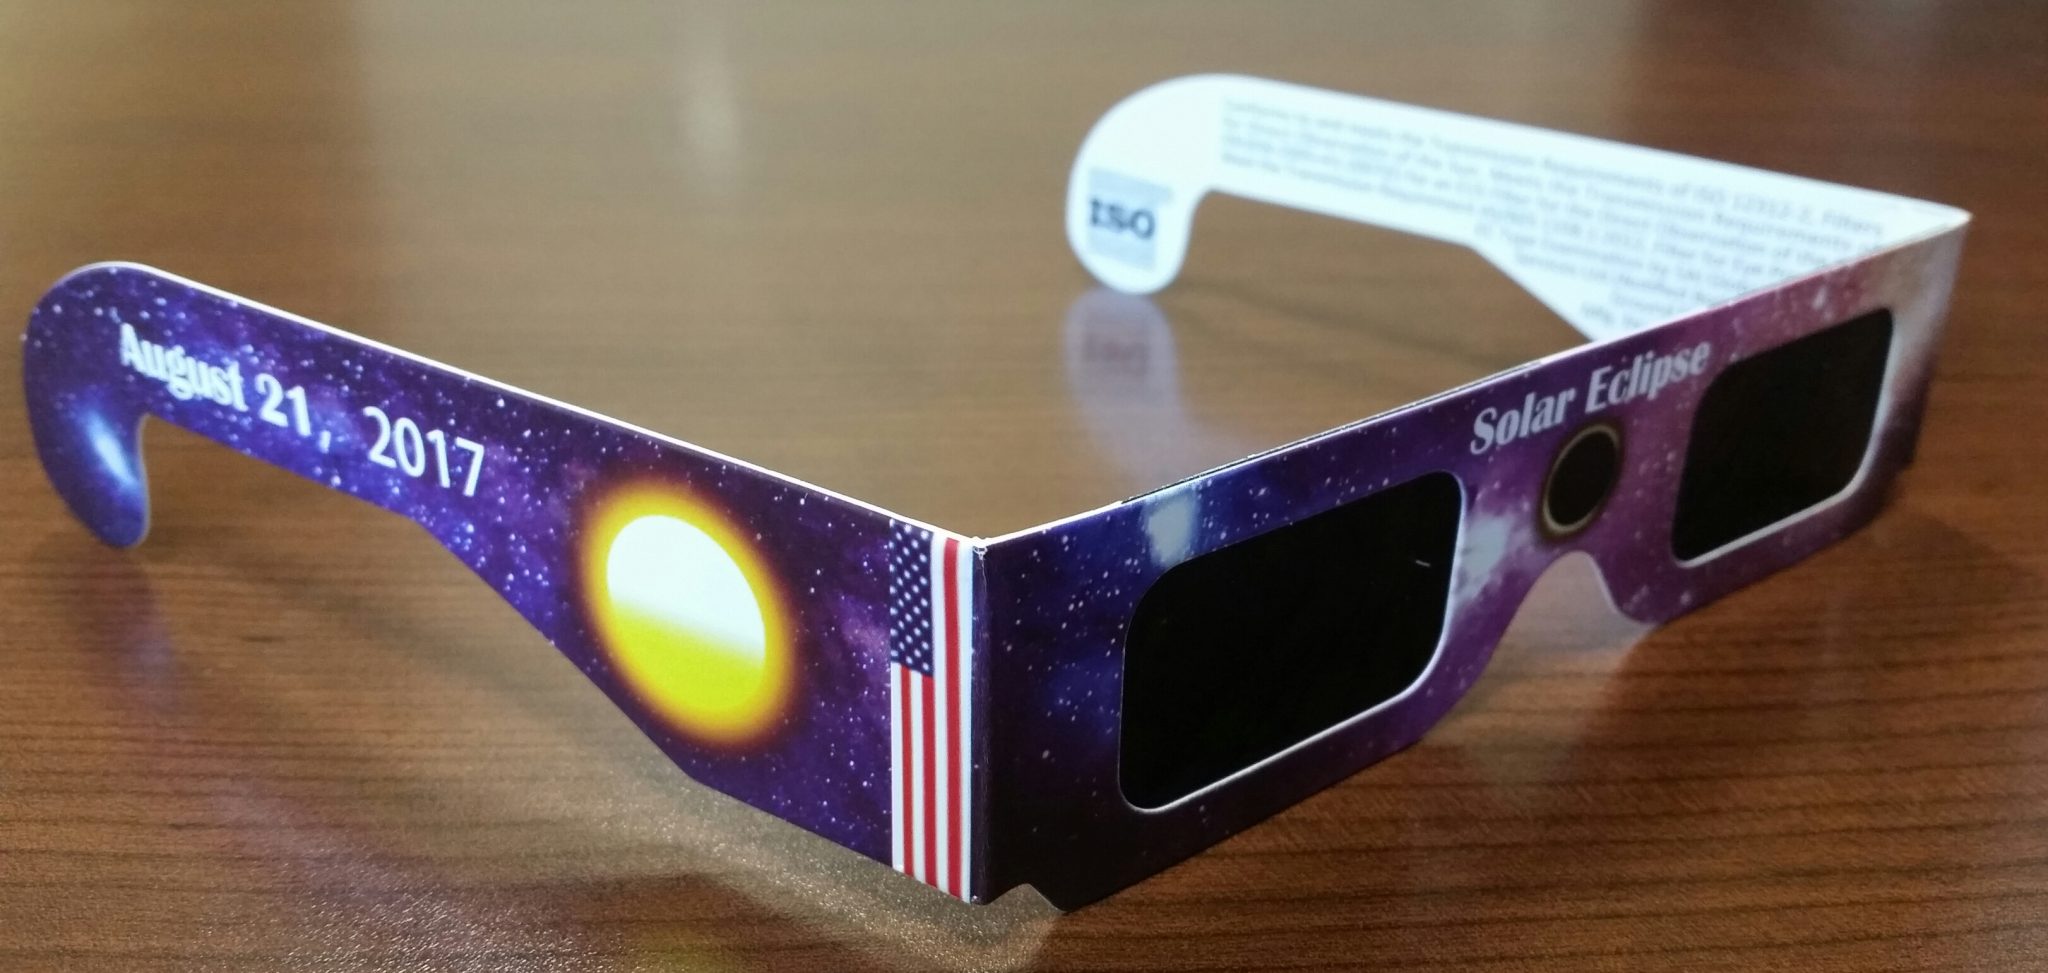 West Optical Offers Complimentary Solar Eclipse Viewing Glasses